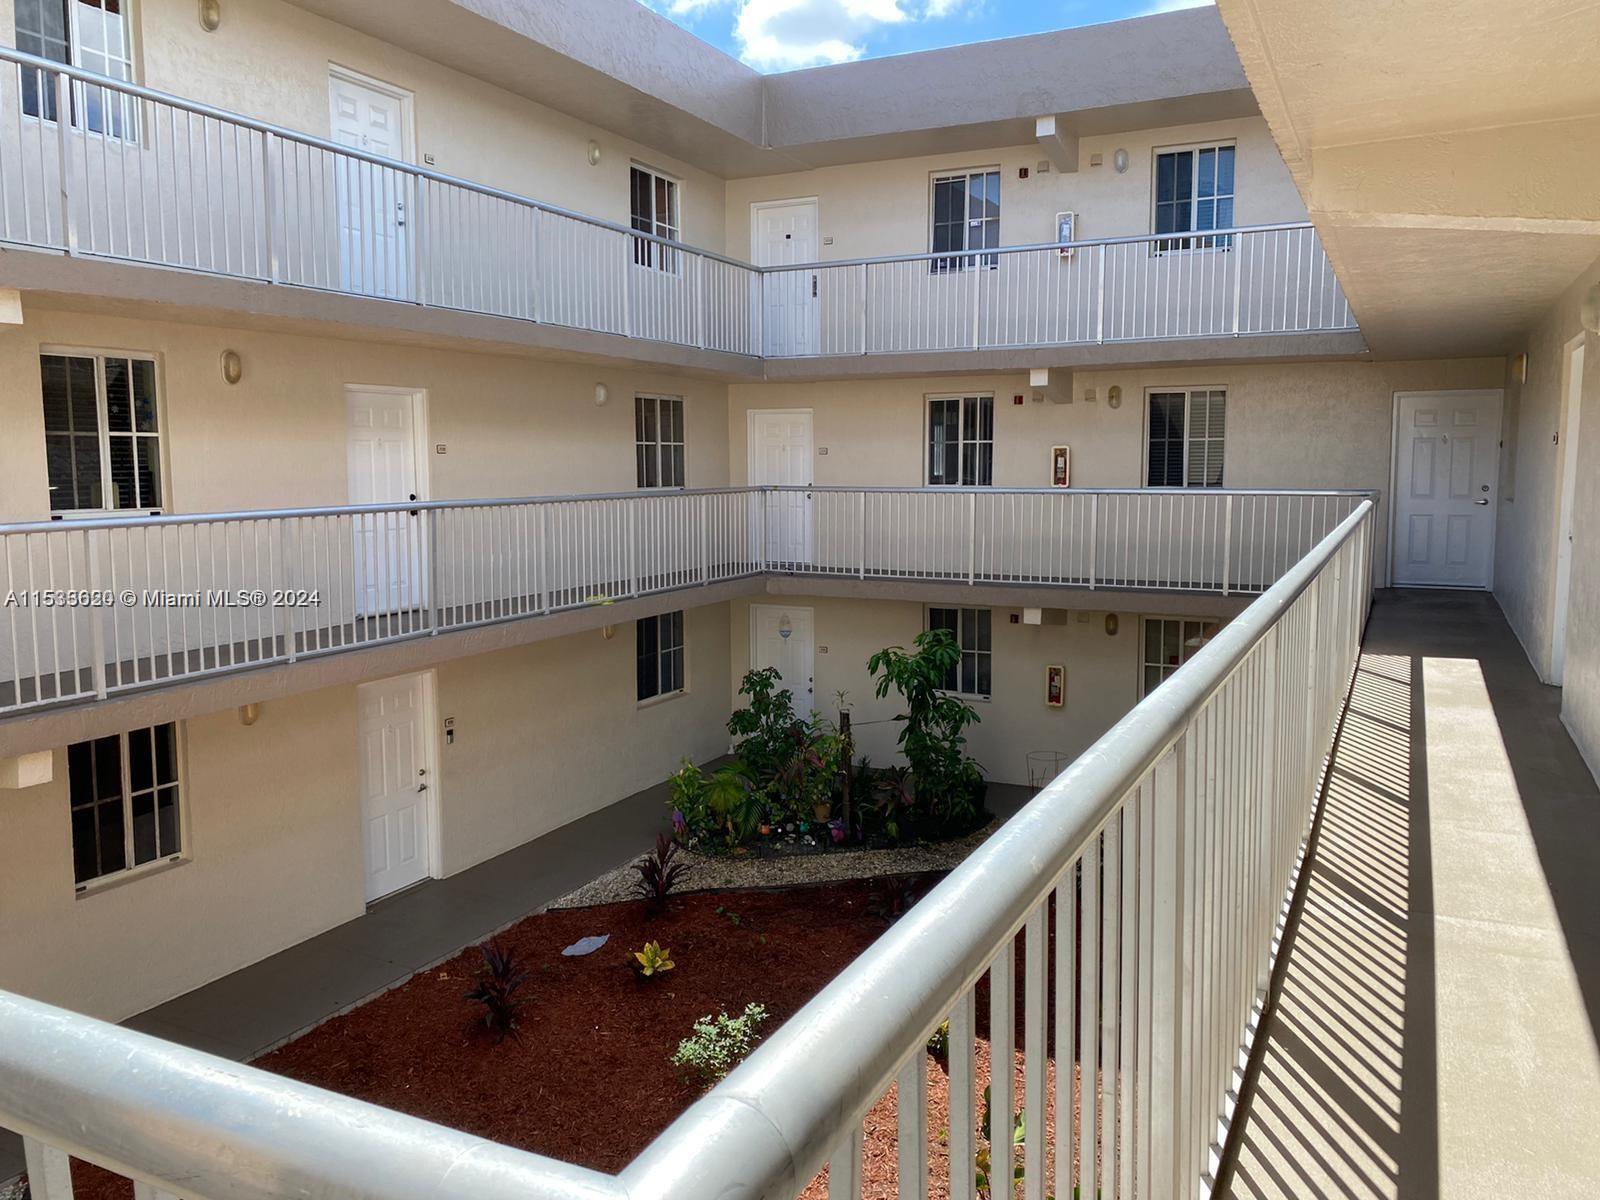 Photo of 6195 NW 186th St #302 in Hialeah, FL